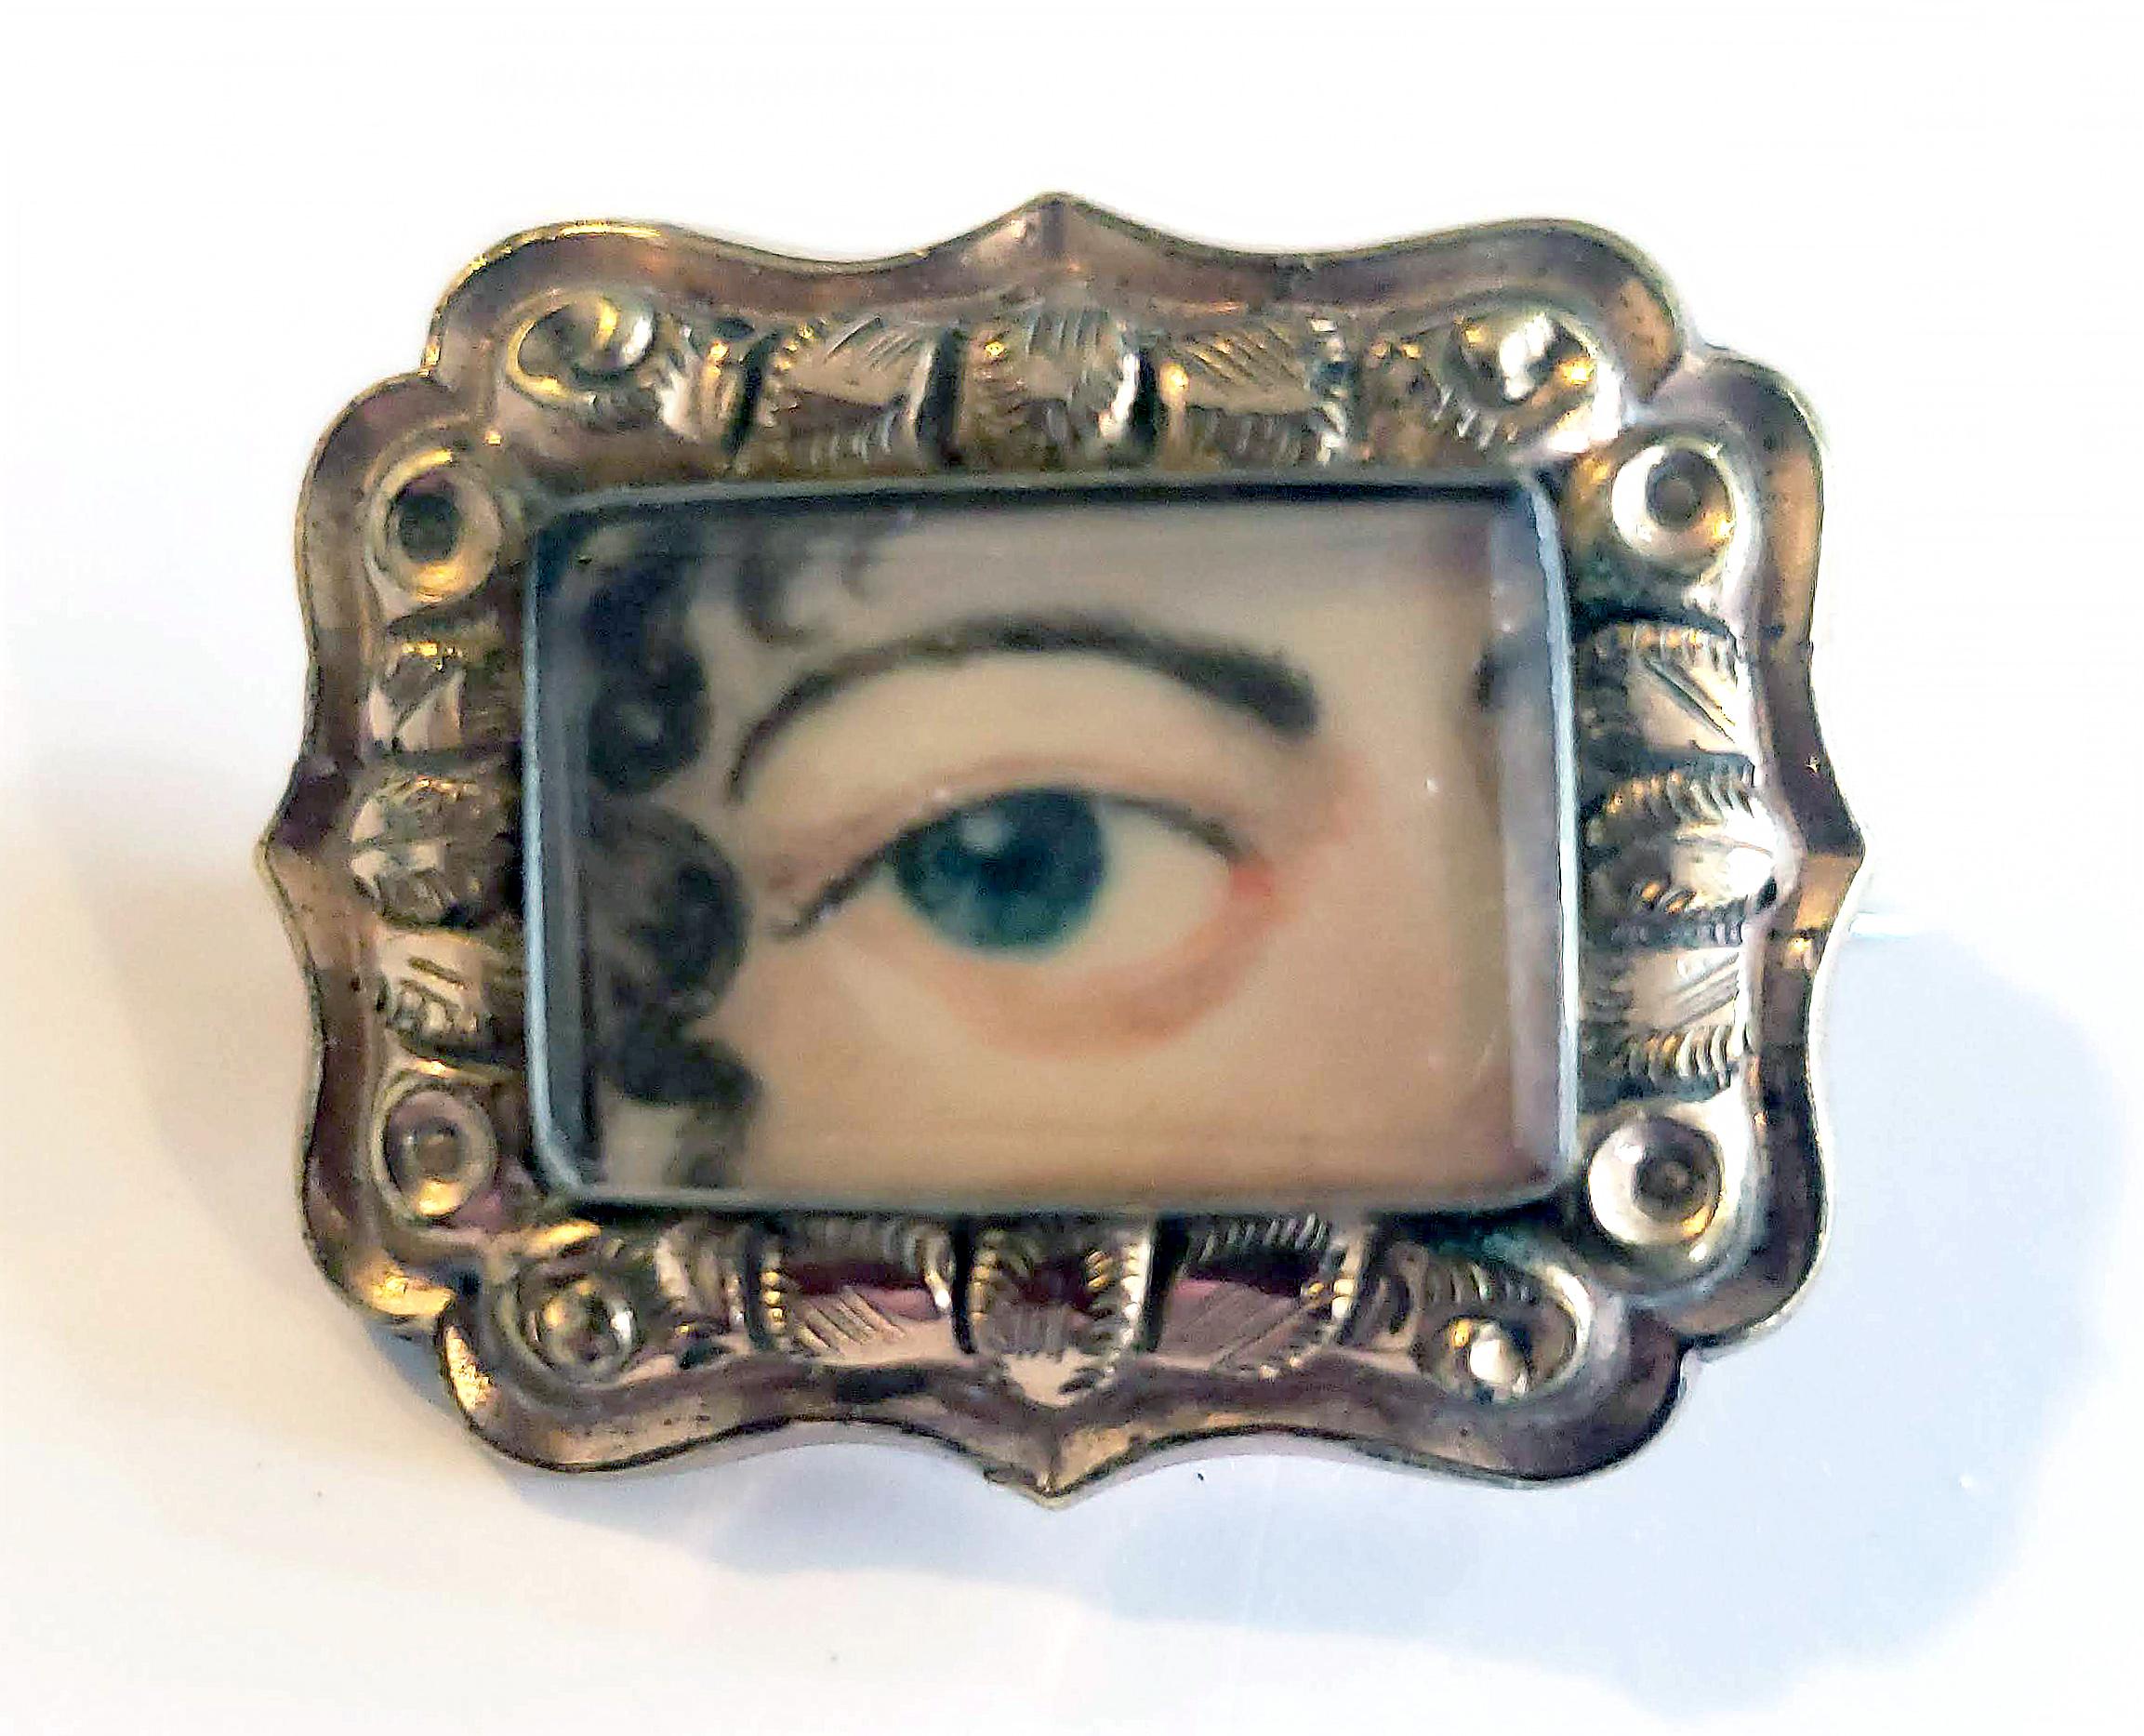 English Antique Lover's eye portrait miniature brooch.
circa 1840-50

The charming oval-shaped portrait miniature is mounted in a gilt metal repoussé frame with a pin back with a gilt leaf design on each side. The portrait is of a woman's right